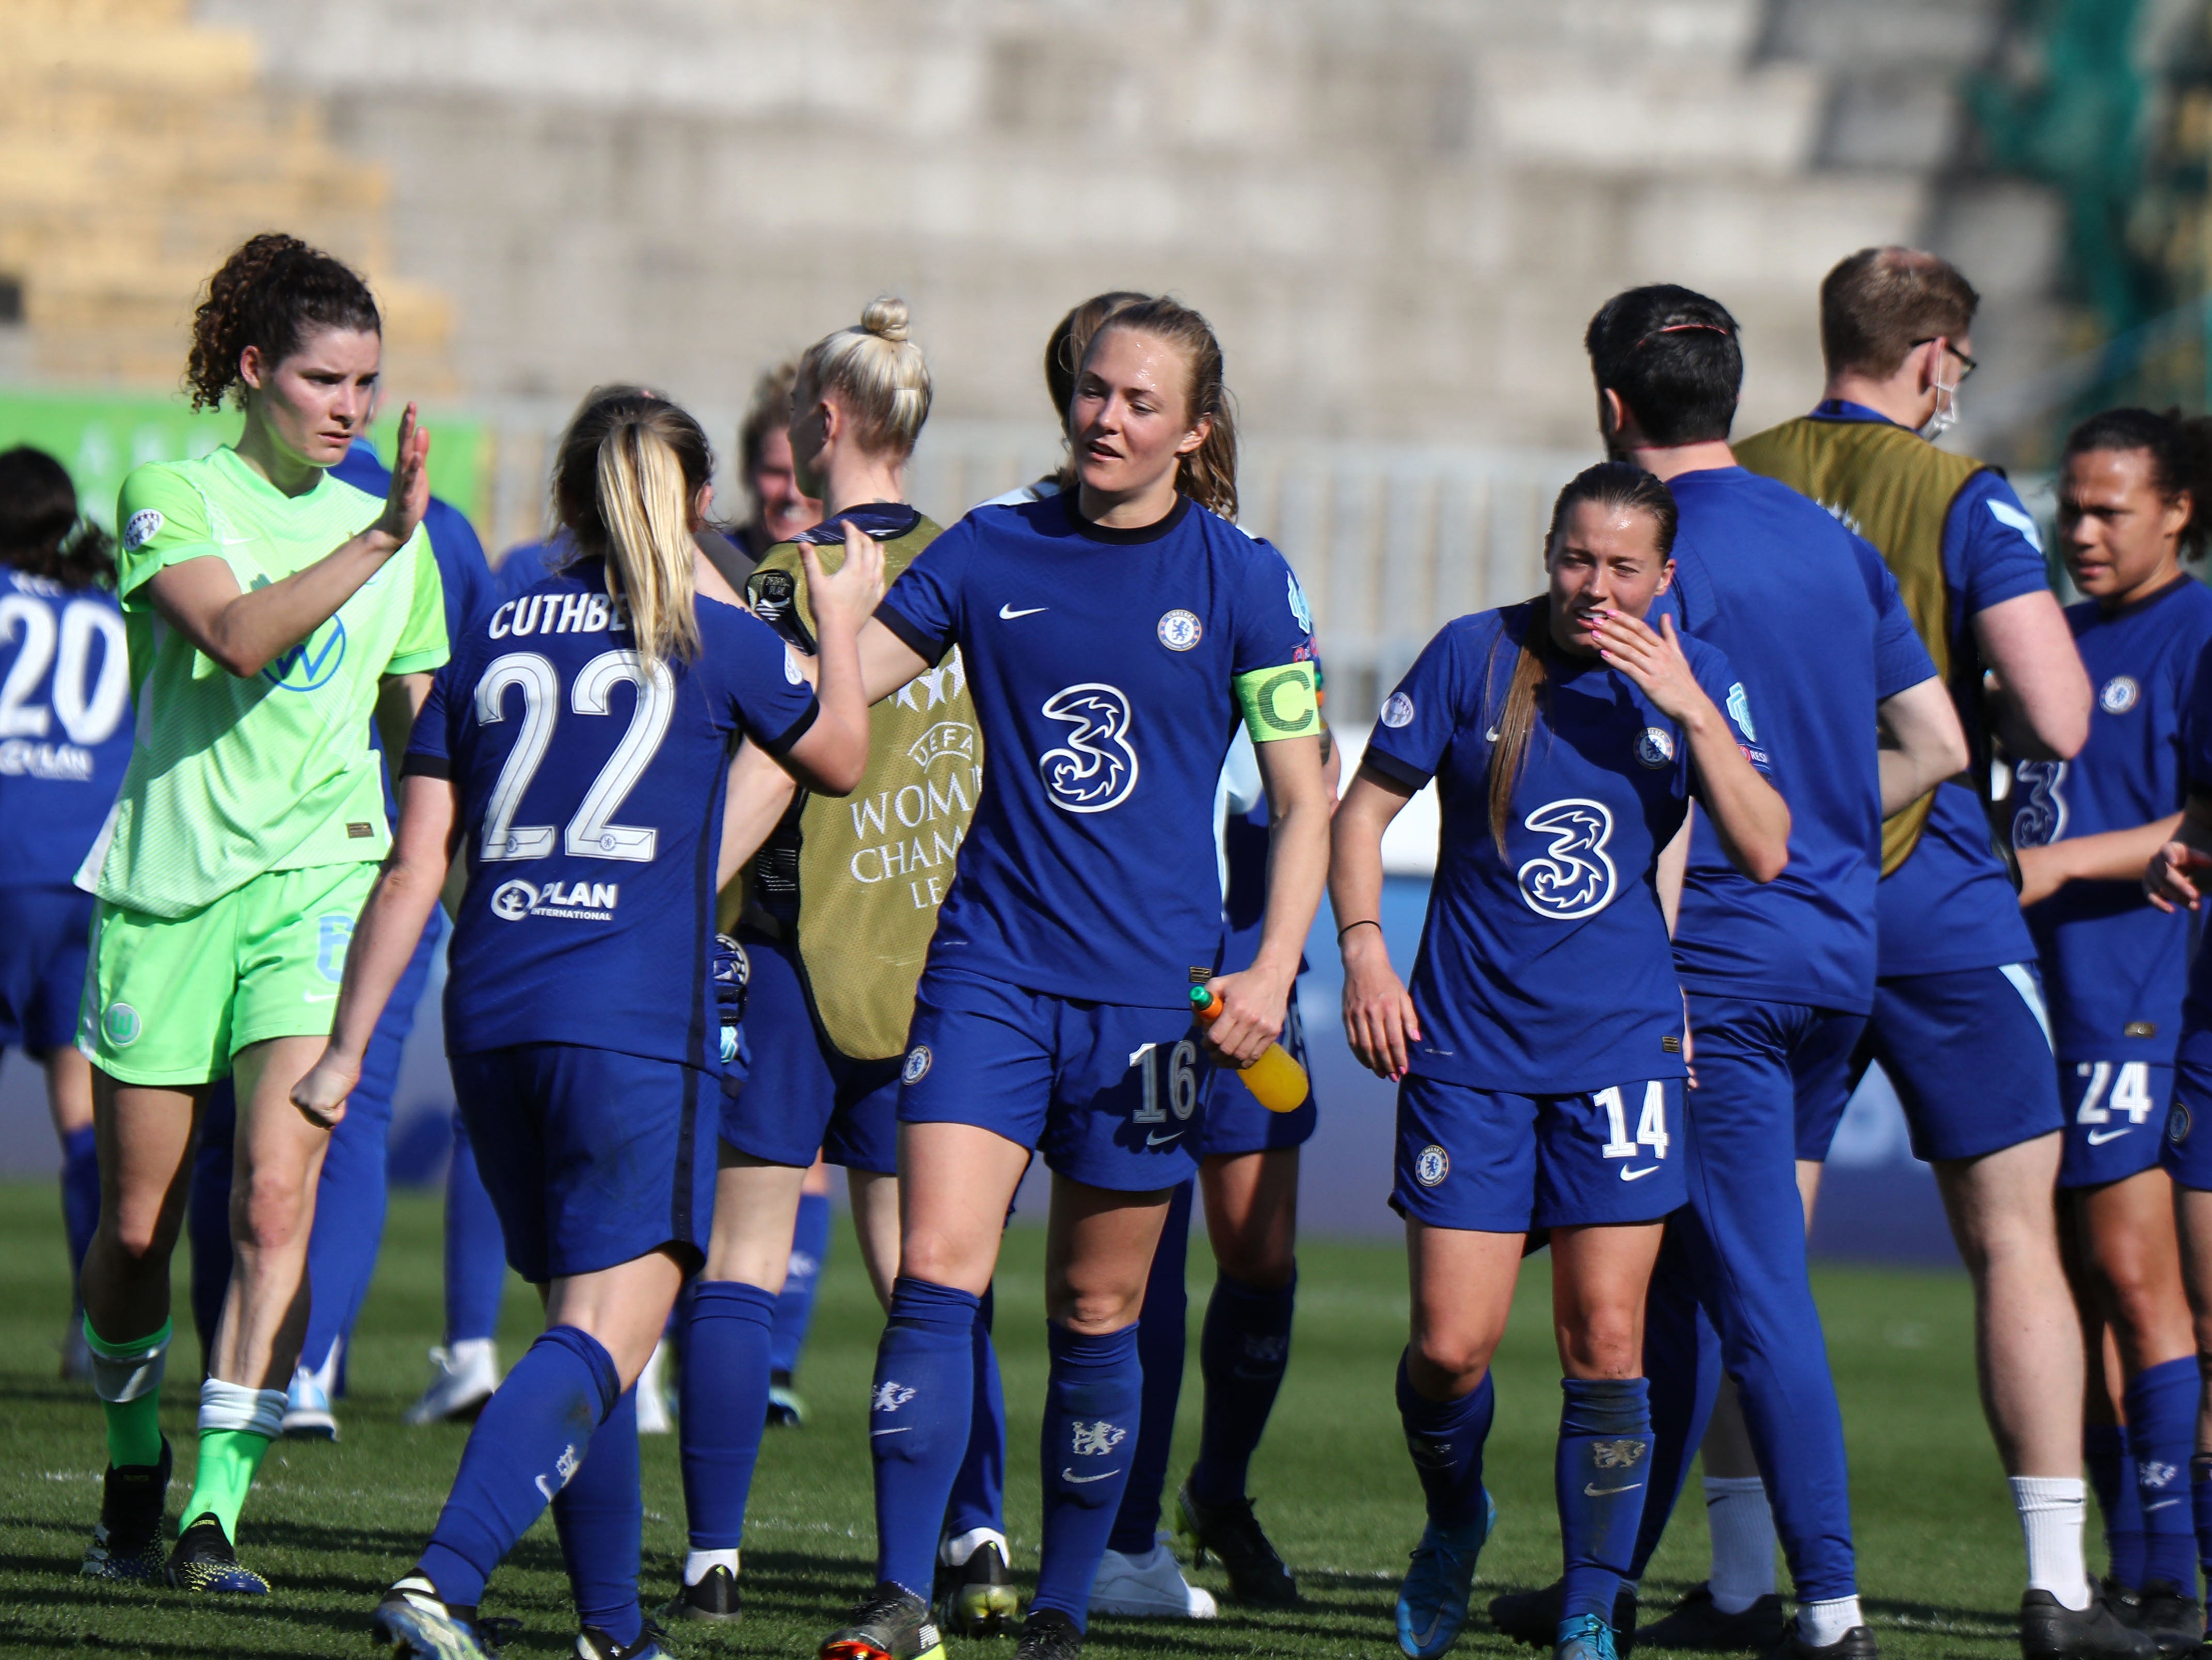 Chelsea celebrate victory over Wolfsburg to reach the final four of the Women’s Champions League